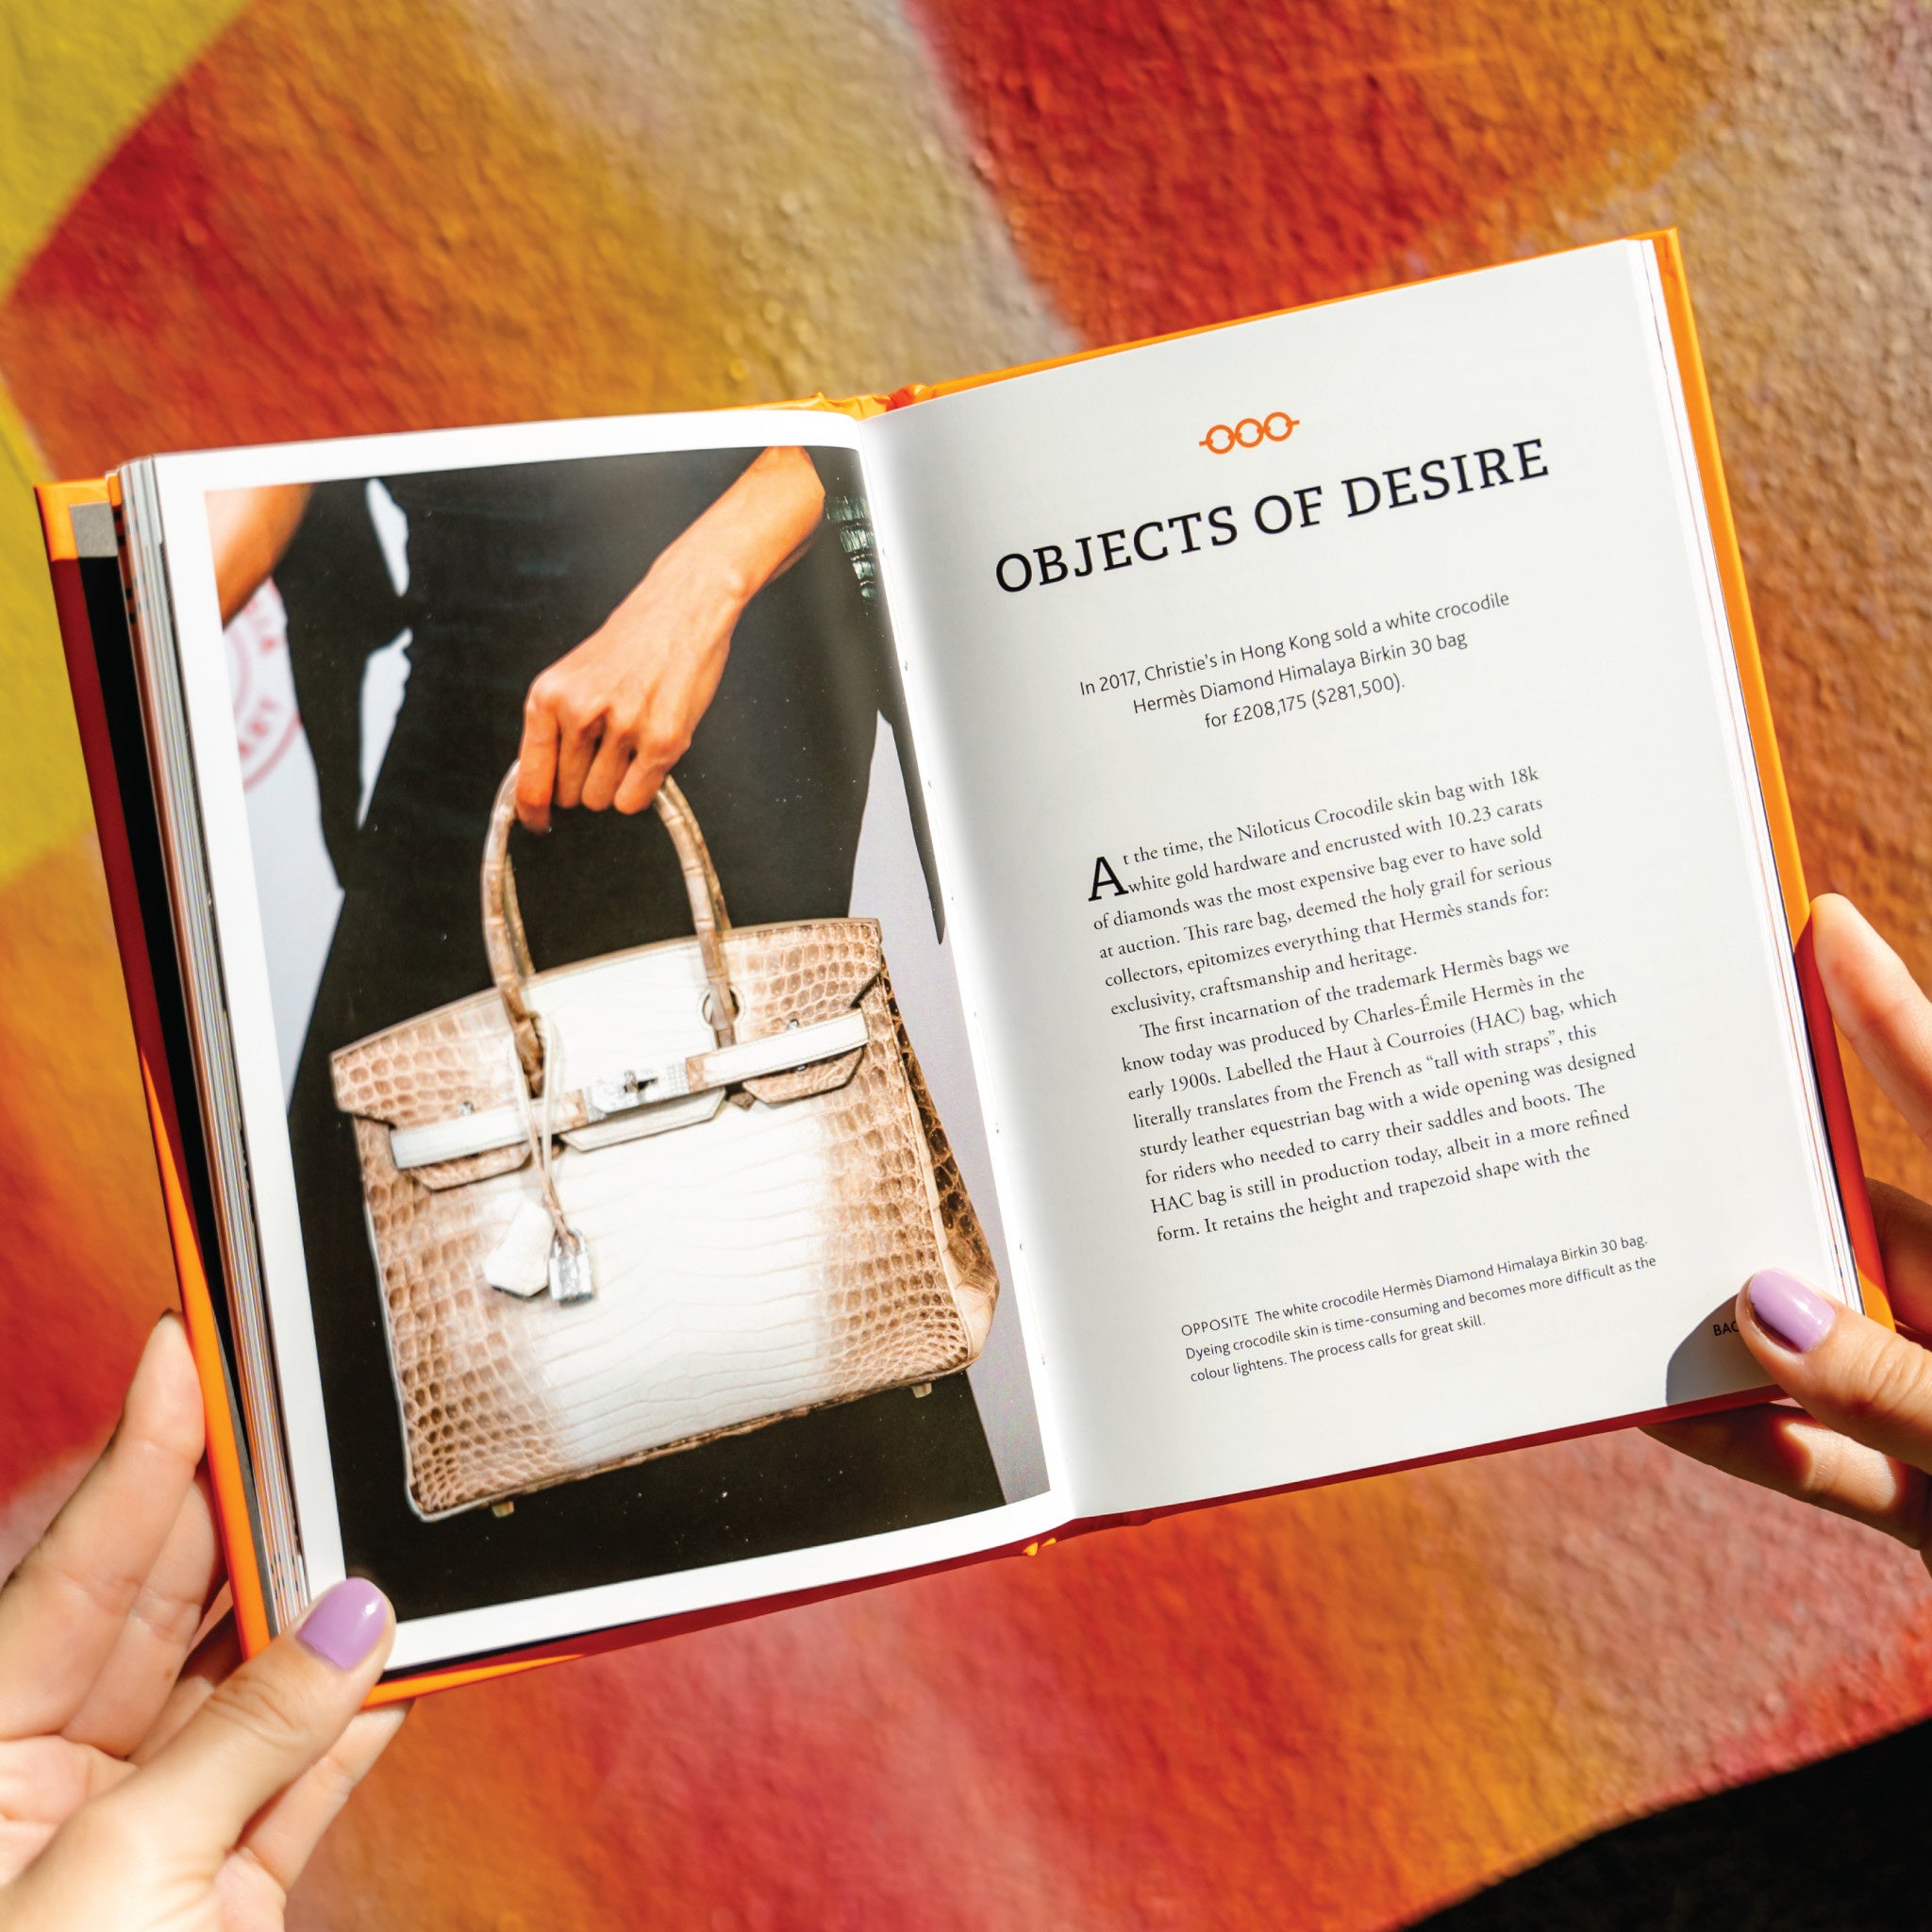 Little Book of Hermès: The Story of the Iconic Fashion House - Wynwood Walls Shop